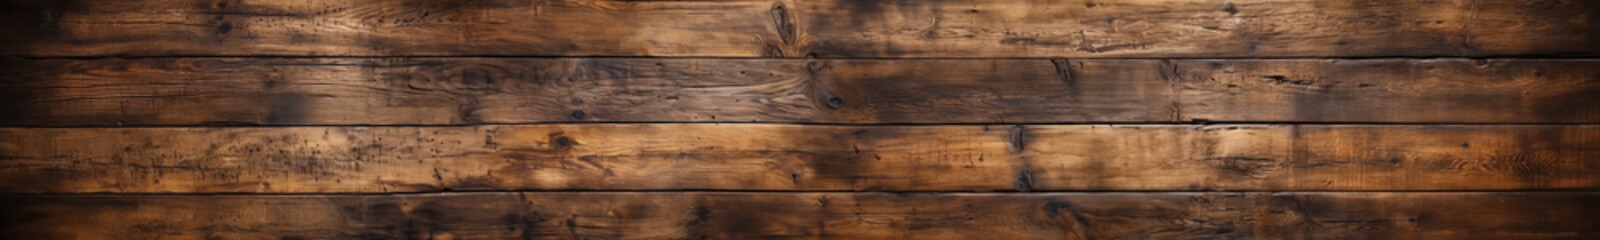 An image of an old wooden board as a background.
Can be used in web design to create a retro look...